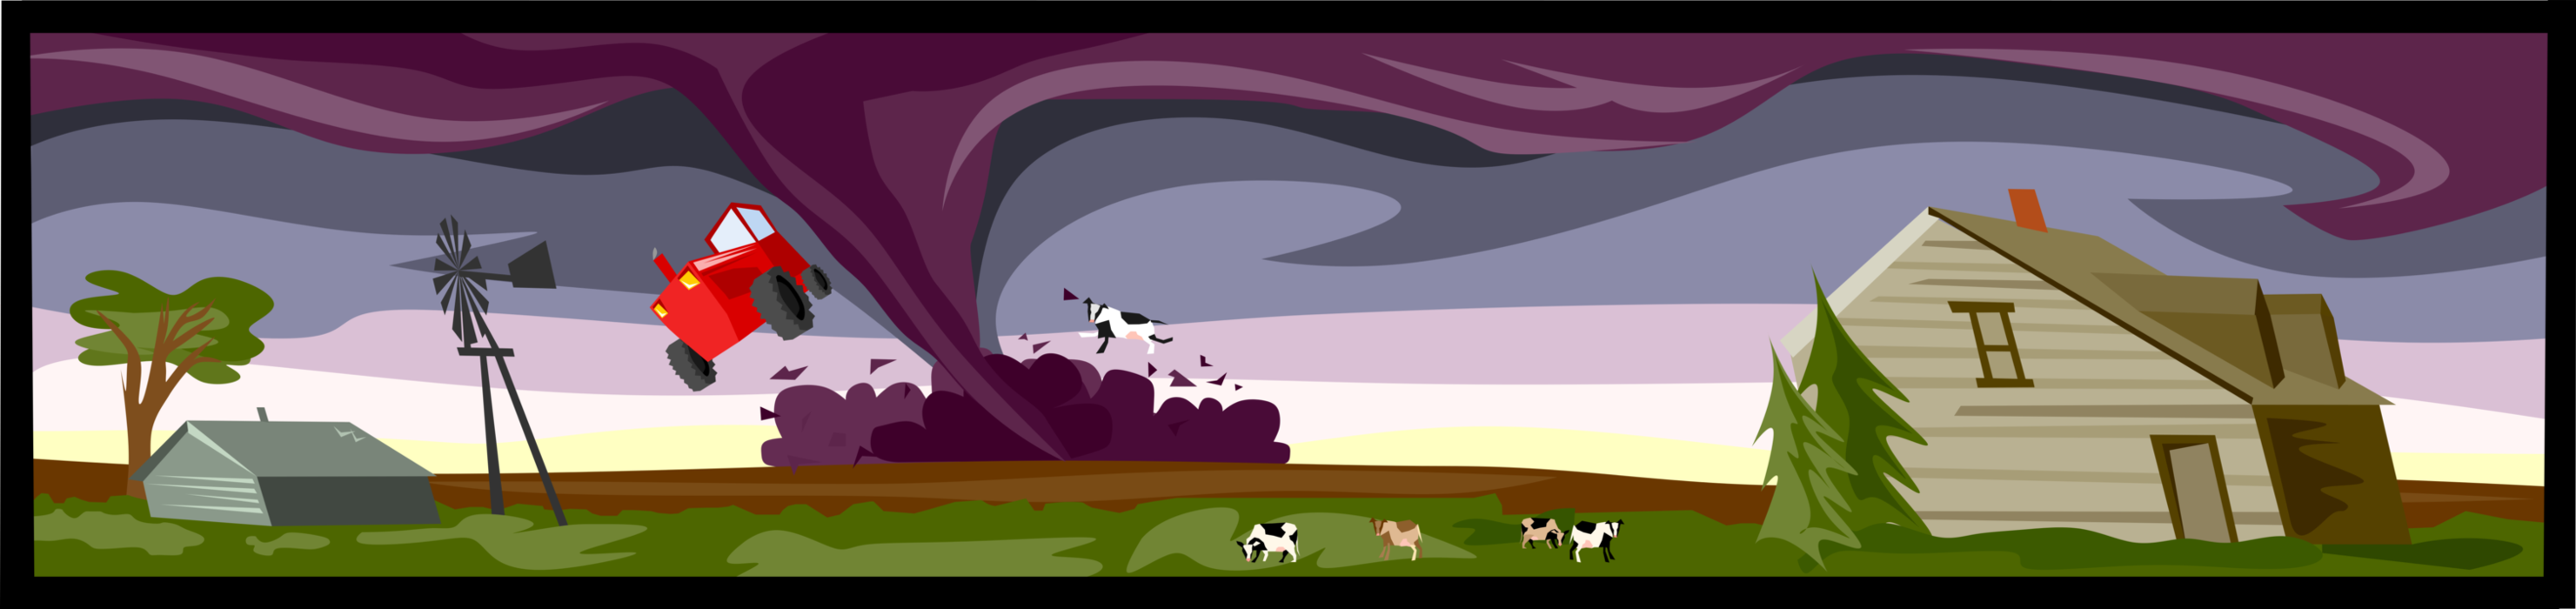 Vector Illustration of Violent Tornado Races Across Midwest United States Creating Destruction in its Path